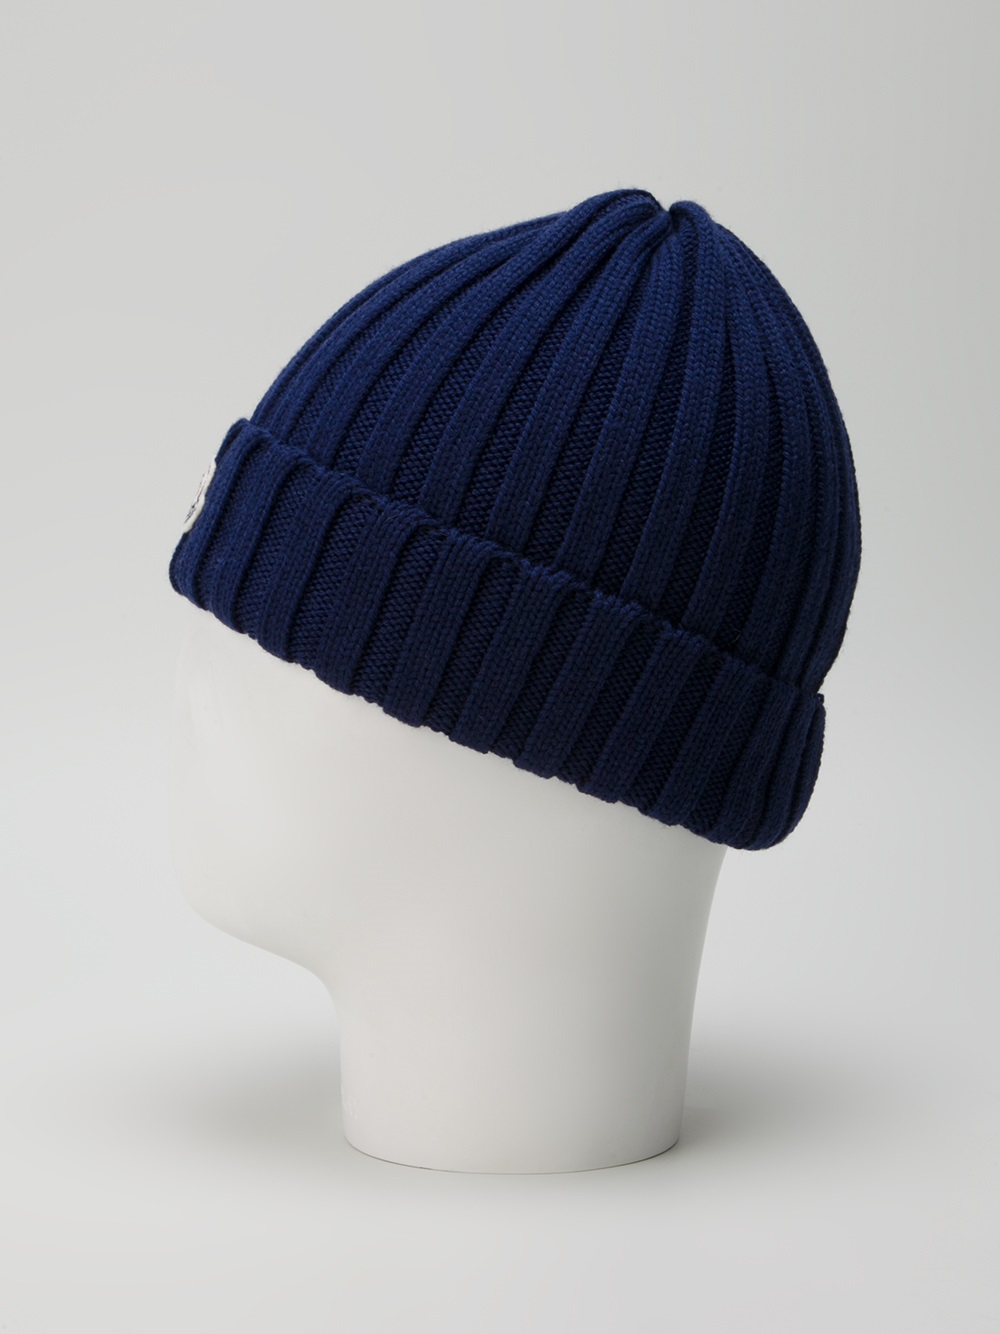 Lyst - Moncler Wool Ribbed Knit Beanie Hat in Blue for Men